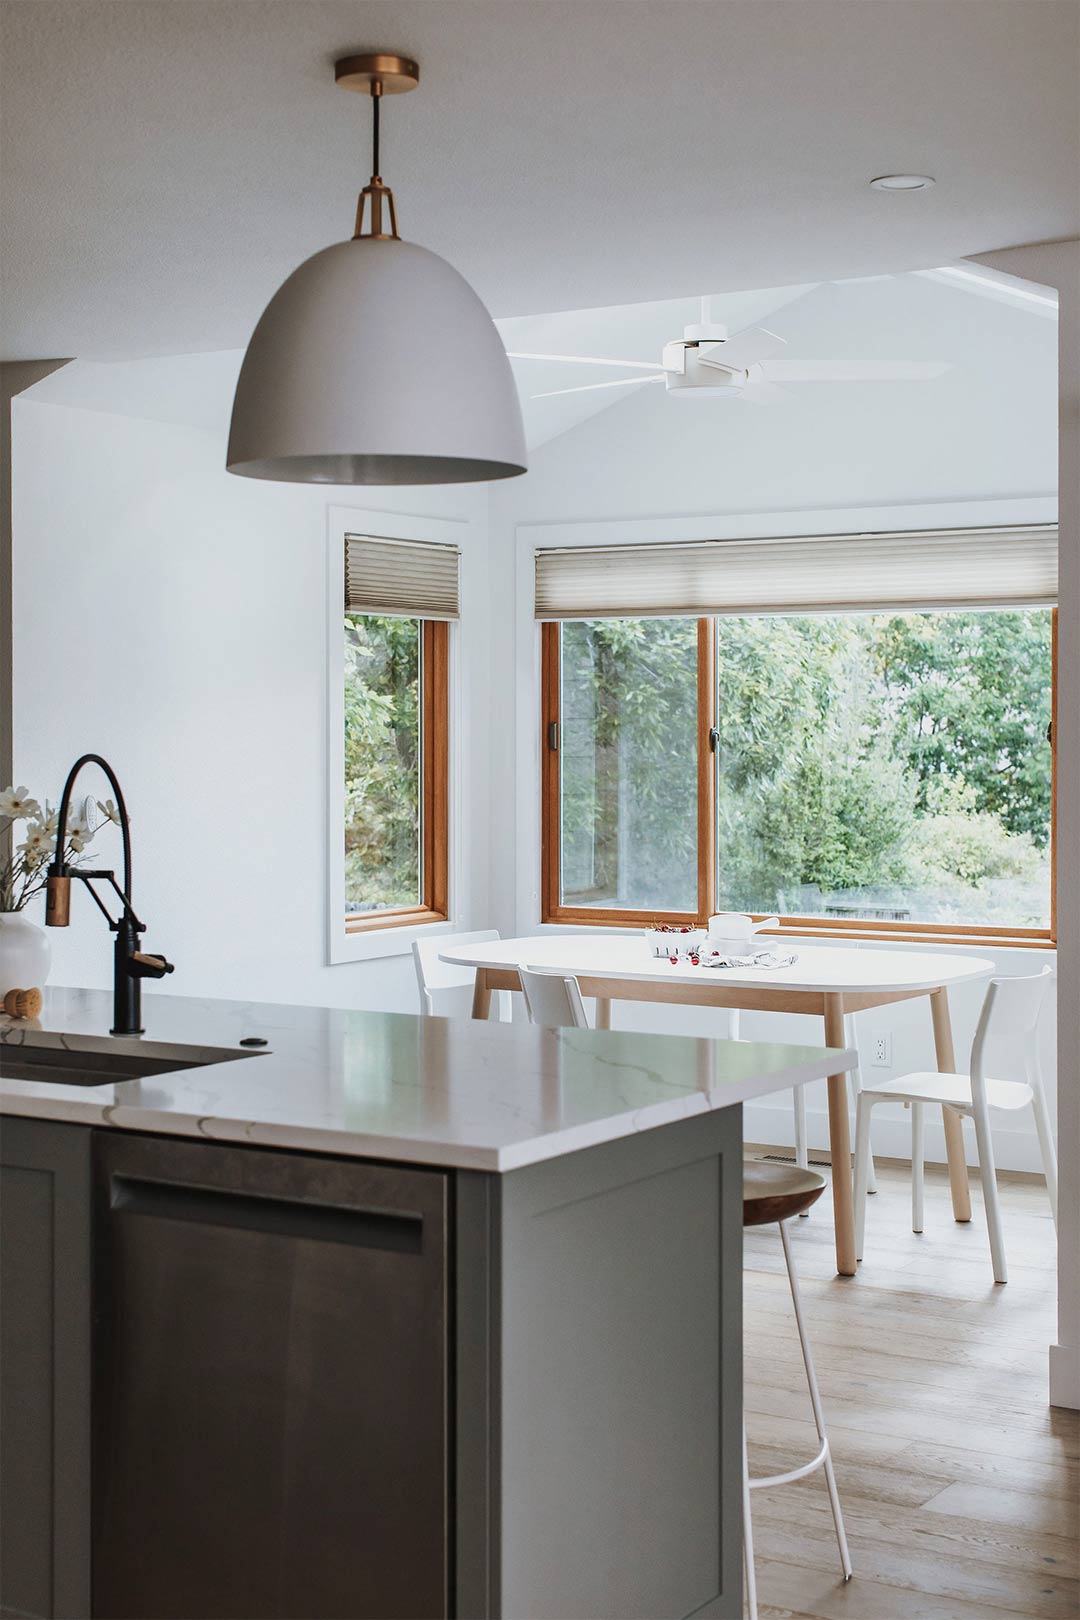 Oversized pendant light over a green cabinet island with quartz countertops over looking a minimalist scandinavian dining nook designed by J. Reiko Design + Co